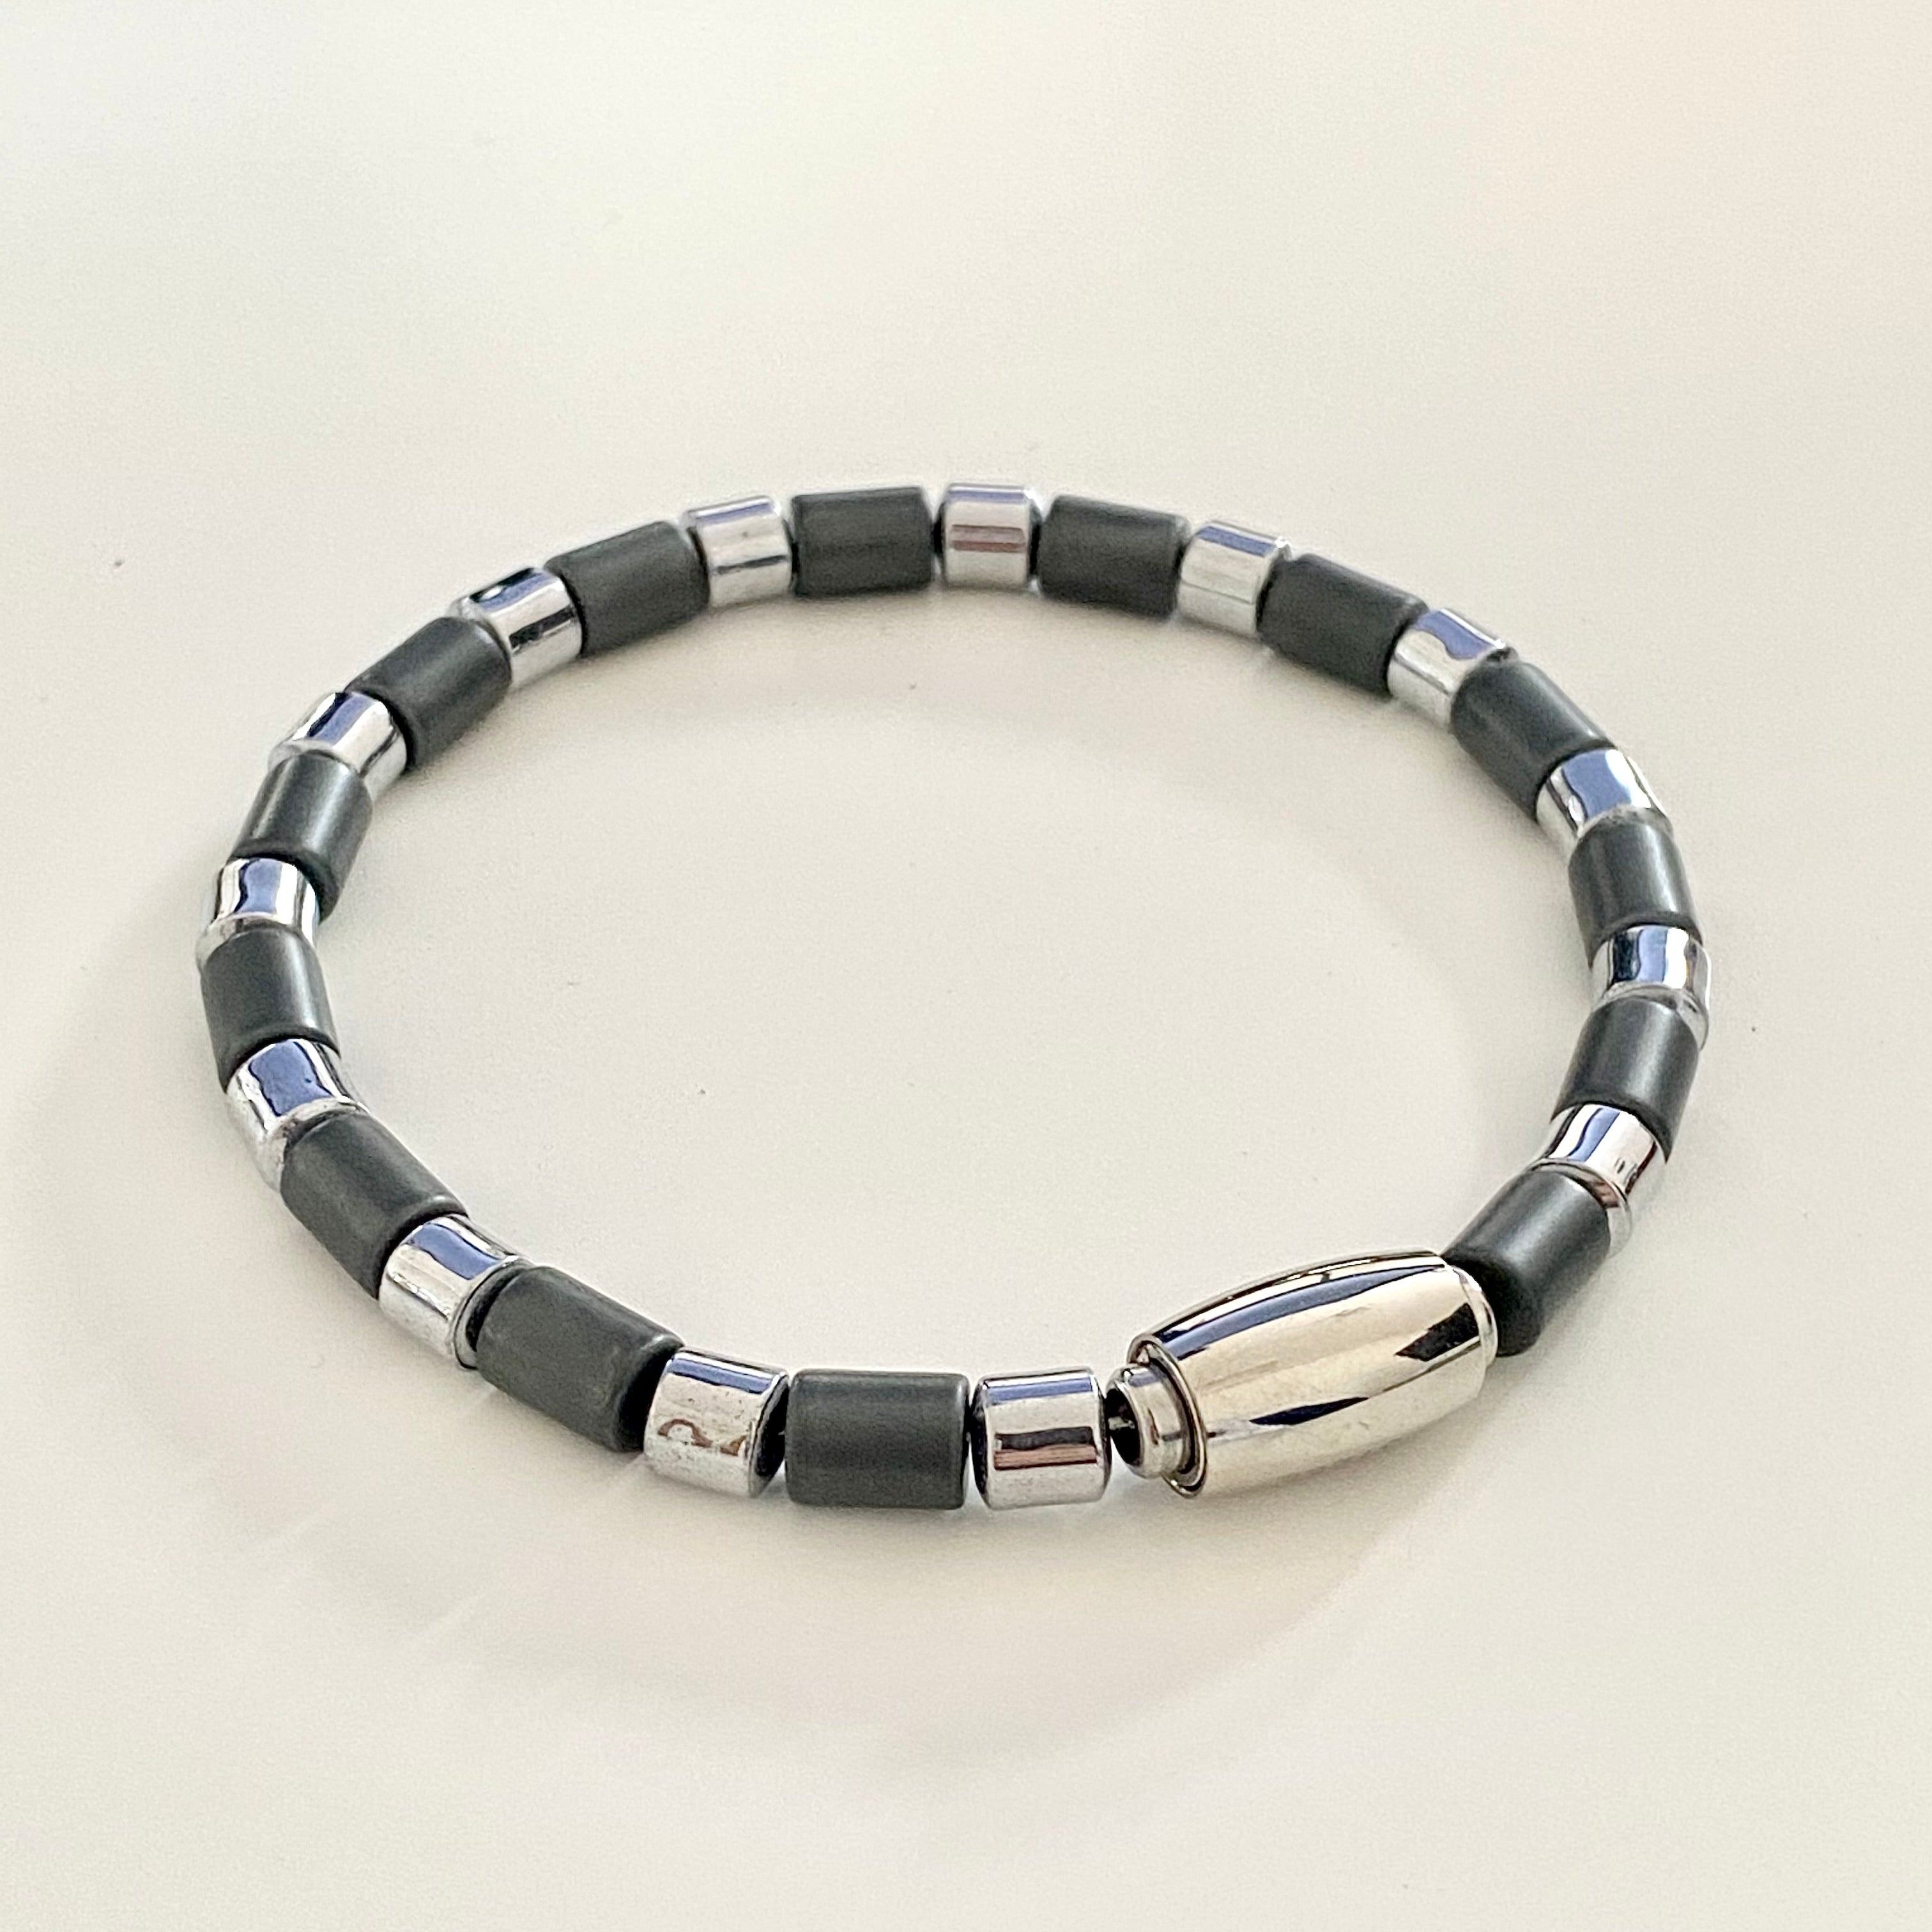 Haematite and Stainless Steel Bead Bracelet with Magnetic Stainless Steel Clasp